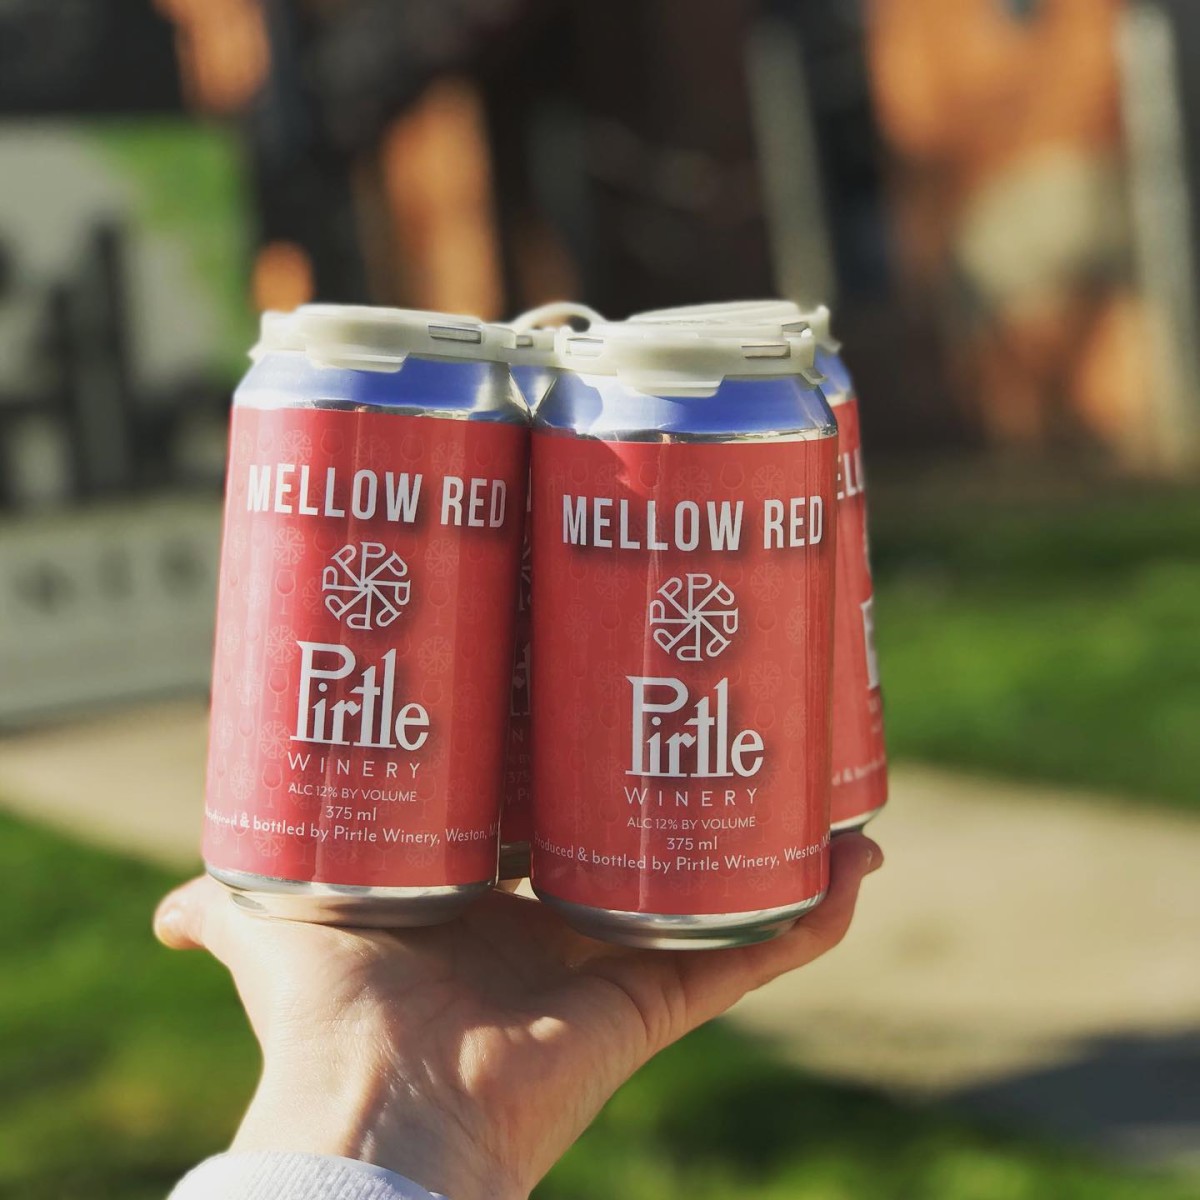 Pirtle Mellow Red in cans